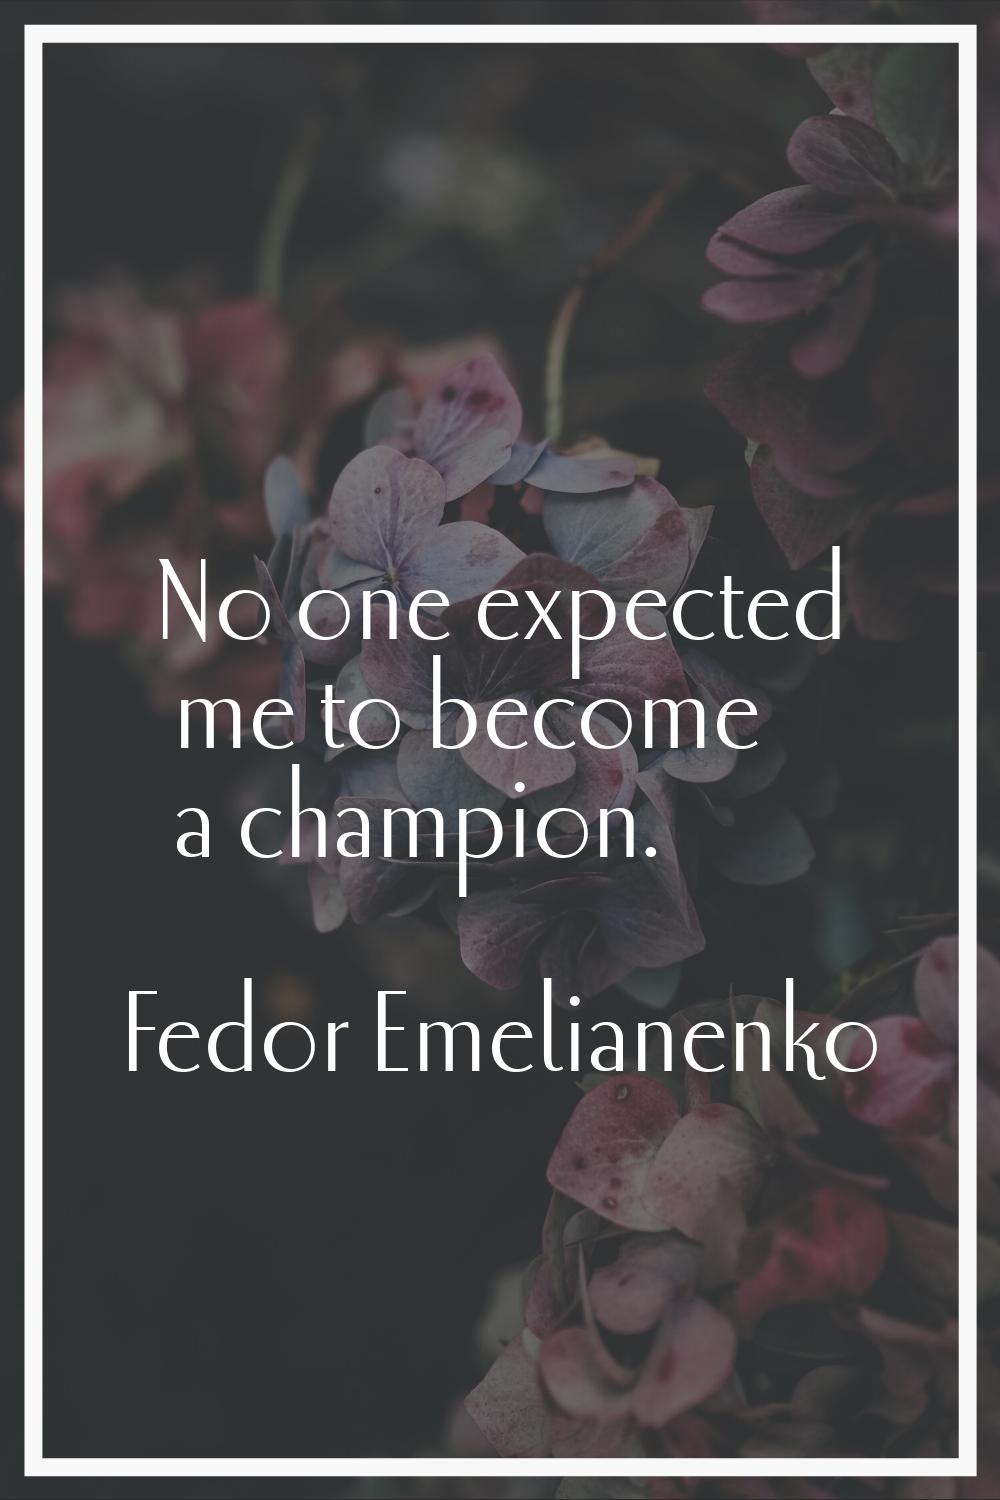 No one expected me to become a champion.